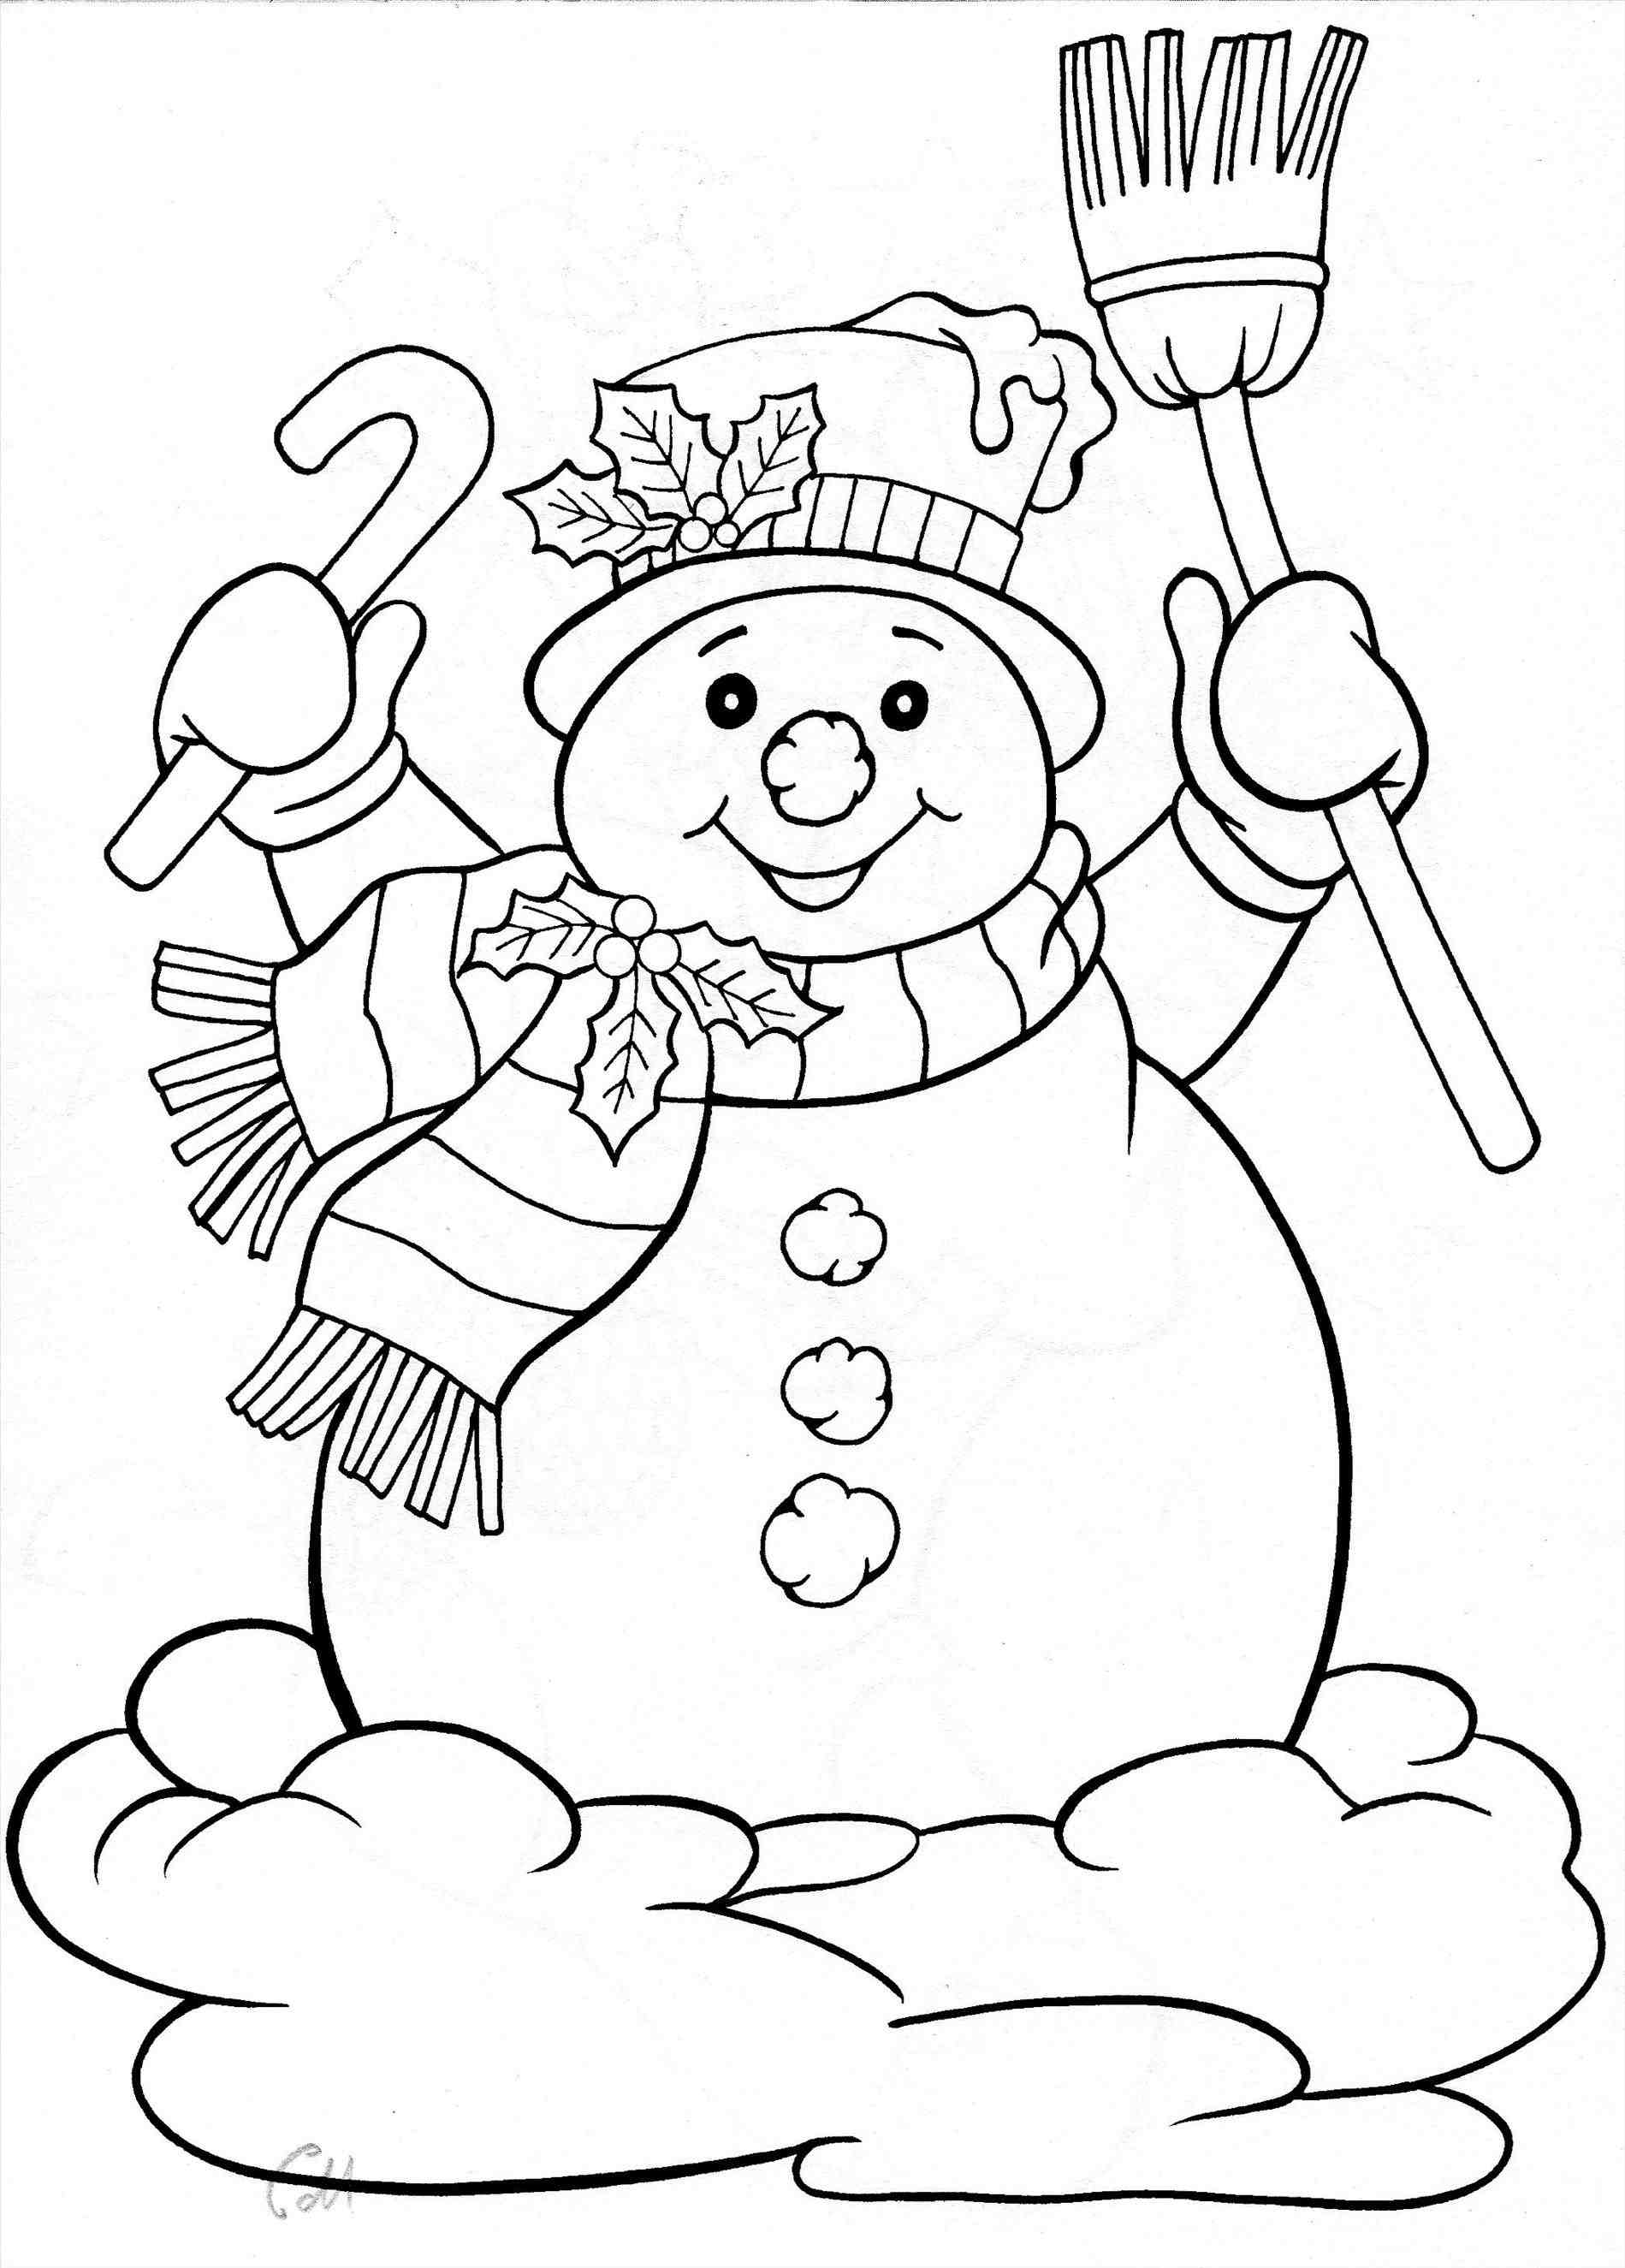 Cute Snowman Coloring Pages at GetColorings.com   Free printable ...